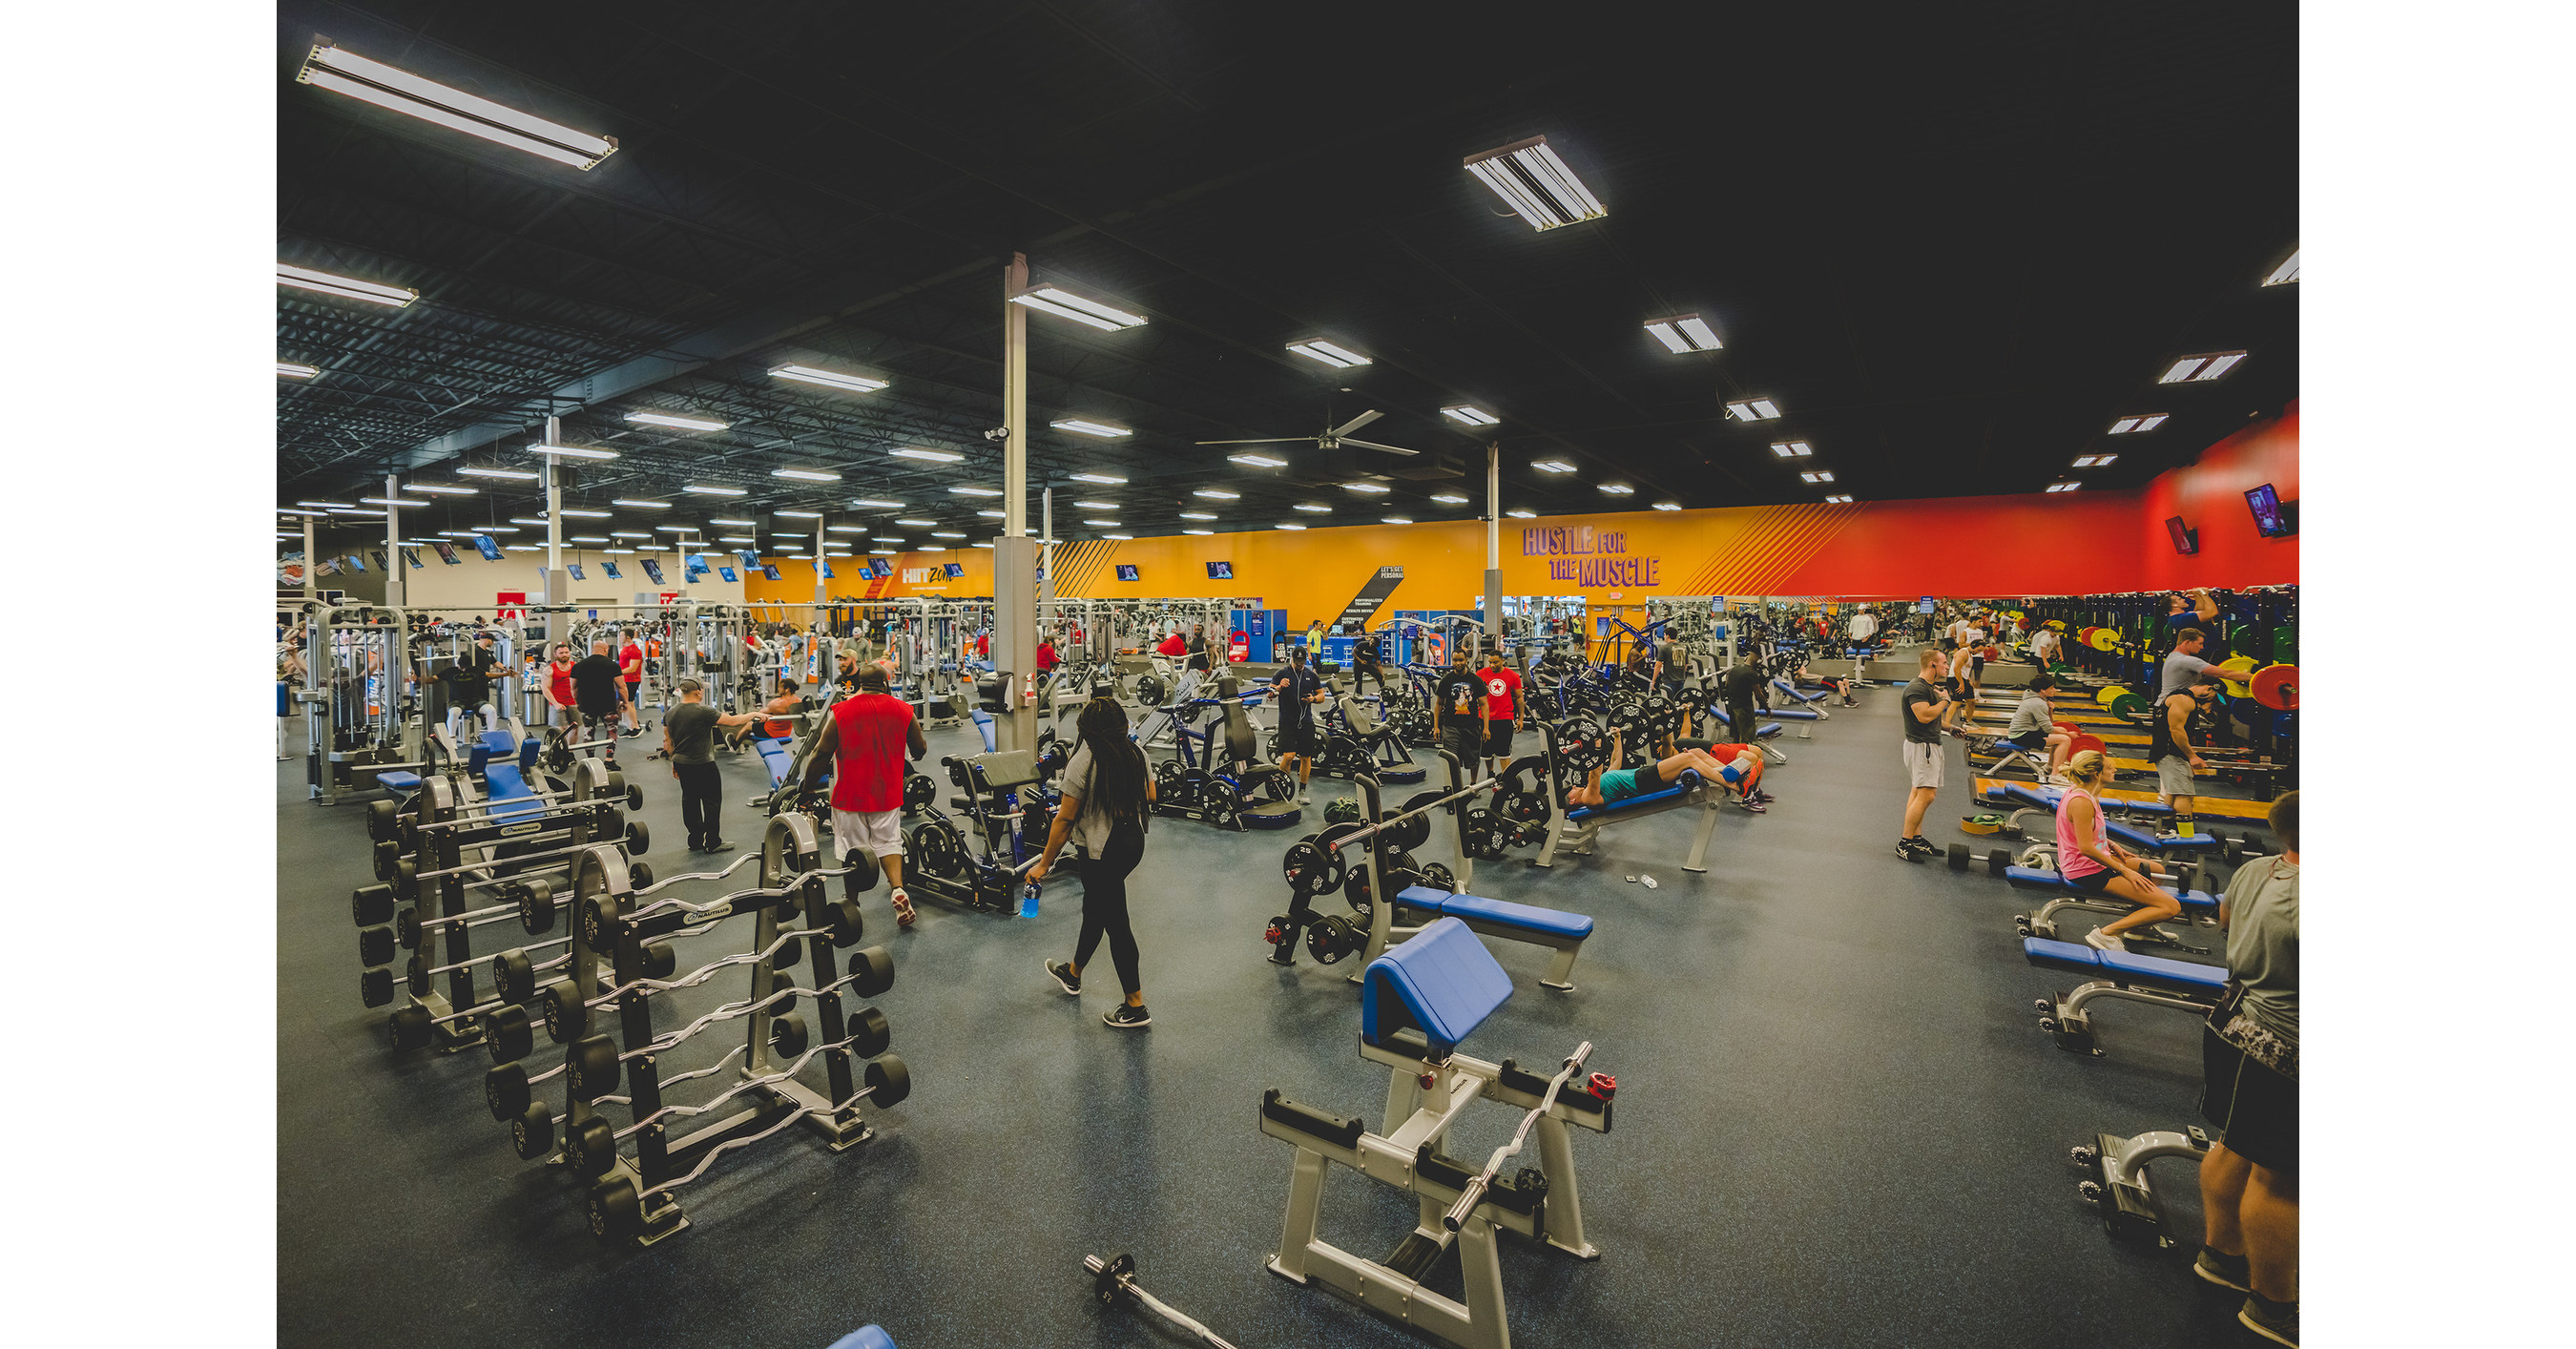 Fitness Ventures LLC Acquires T&N Investments, LLC and their 4 Crunch  Fitness Locations in Louisville Kentucky, Growing the Franchise to 35  Locations